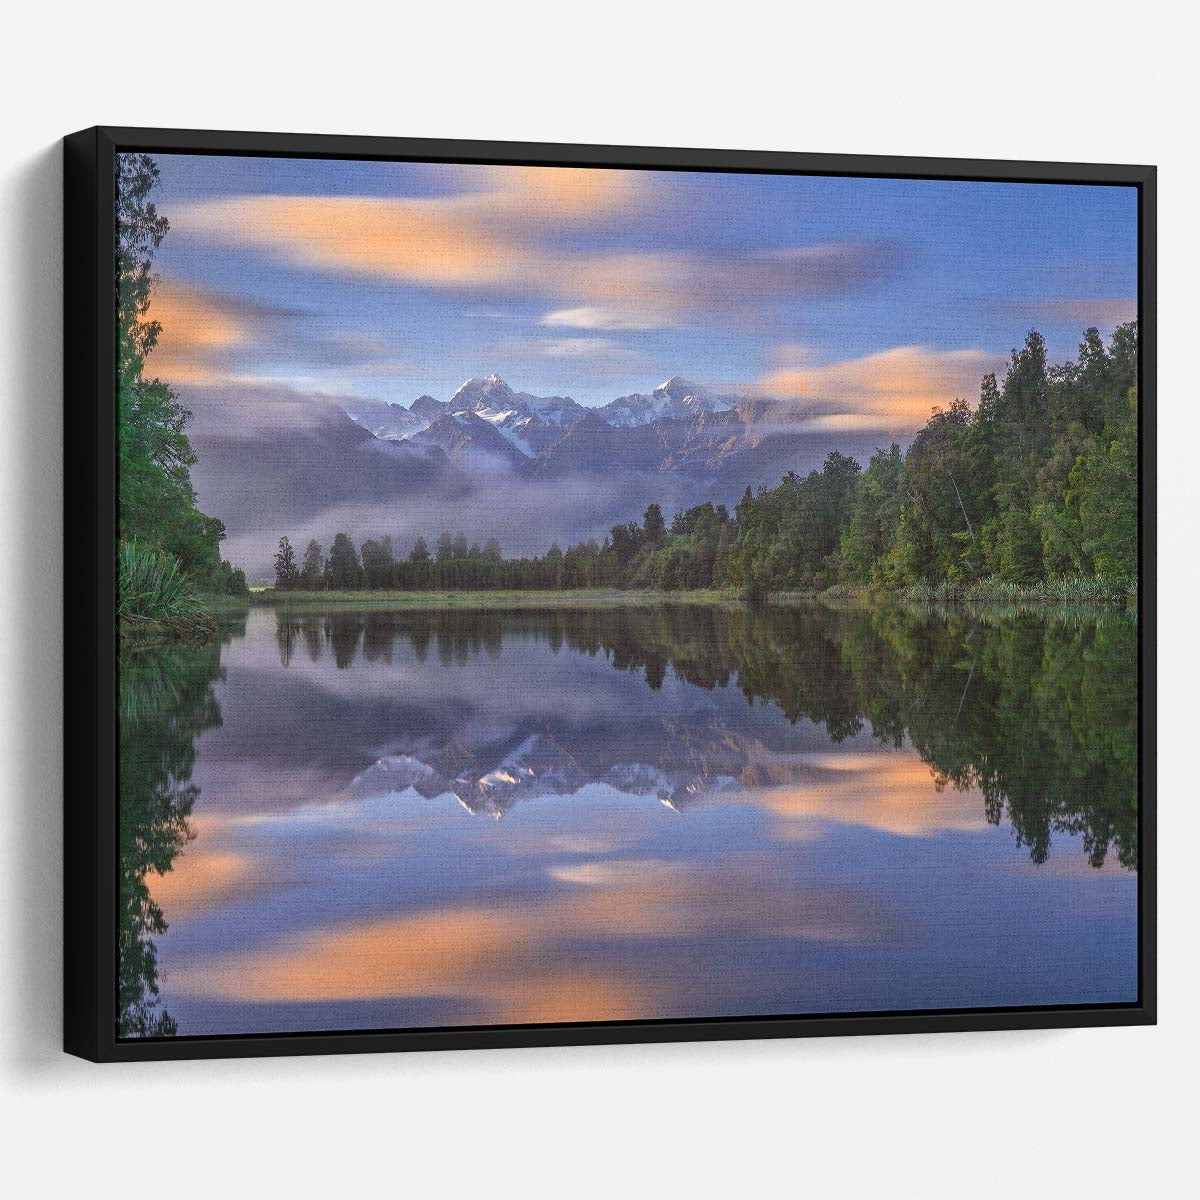 Sunrise at Lake Matheson Snowy Peaks Reflection Wall Art by Luxuriance Designs. Made in USA.